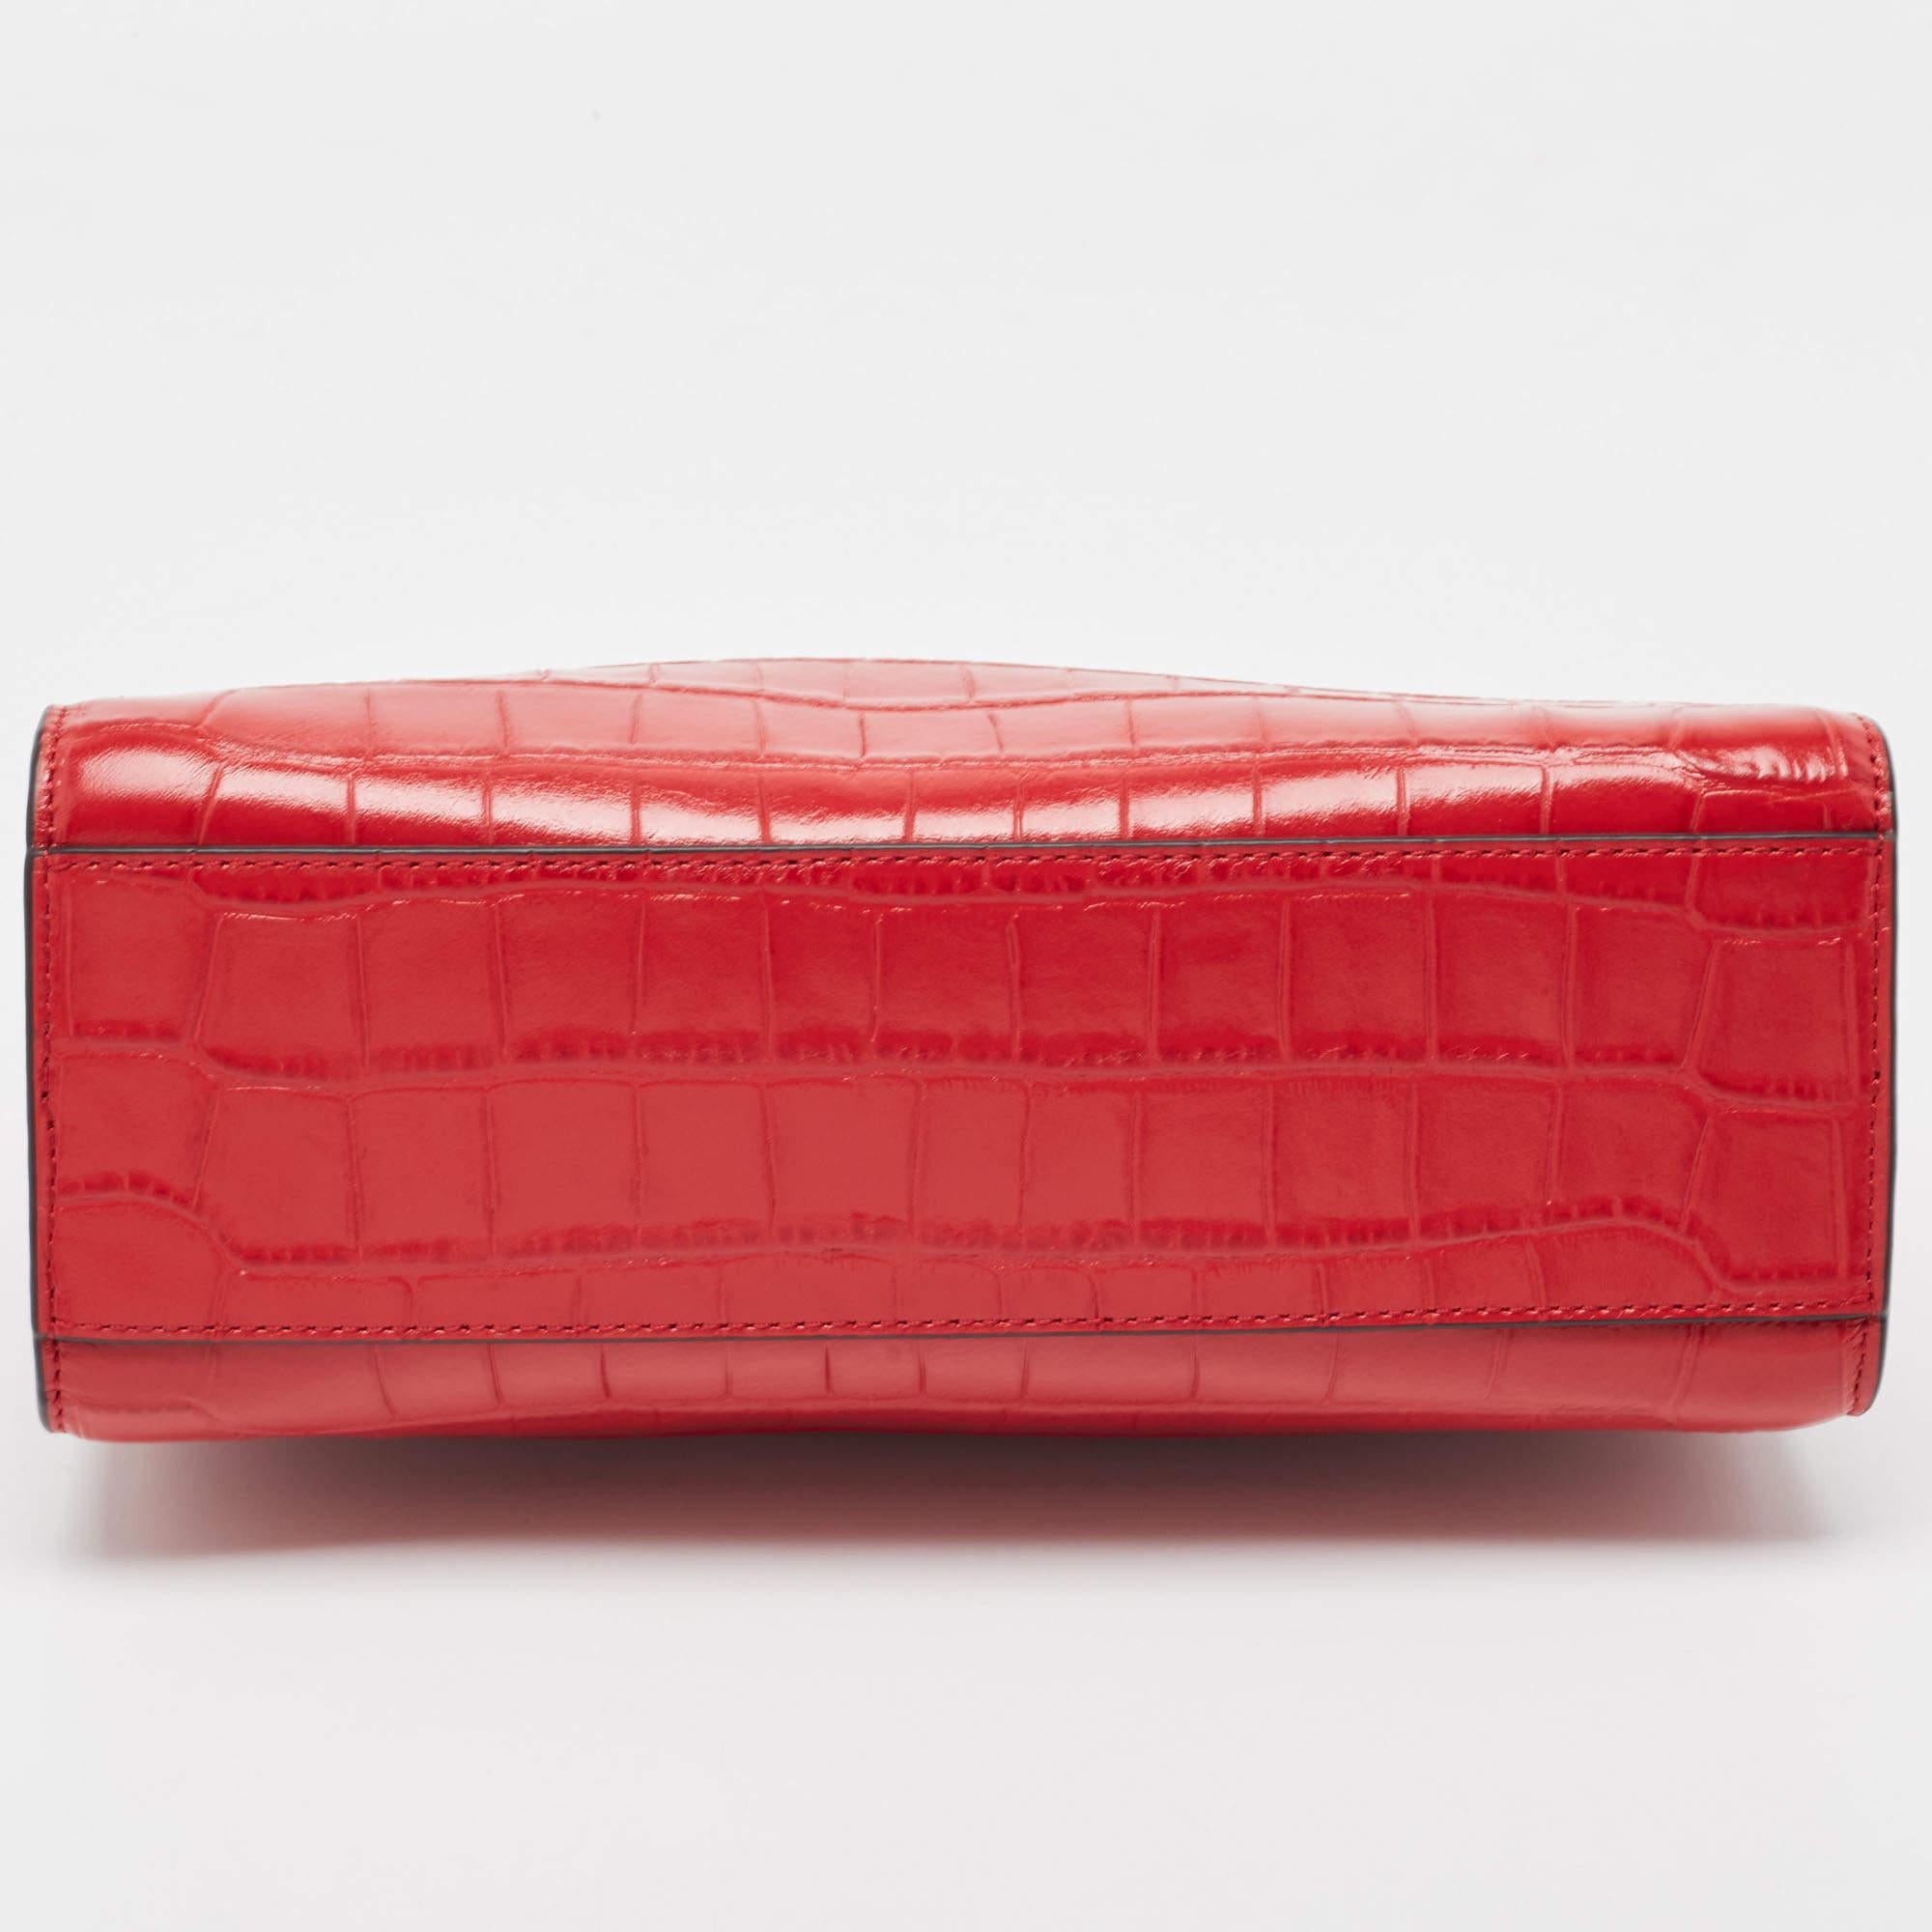 DKNY Red Croc Embossed Leather Cooper Top Handle Bag 5